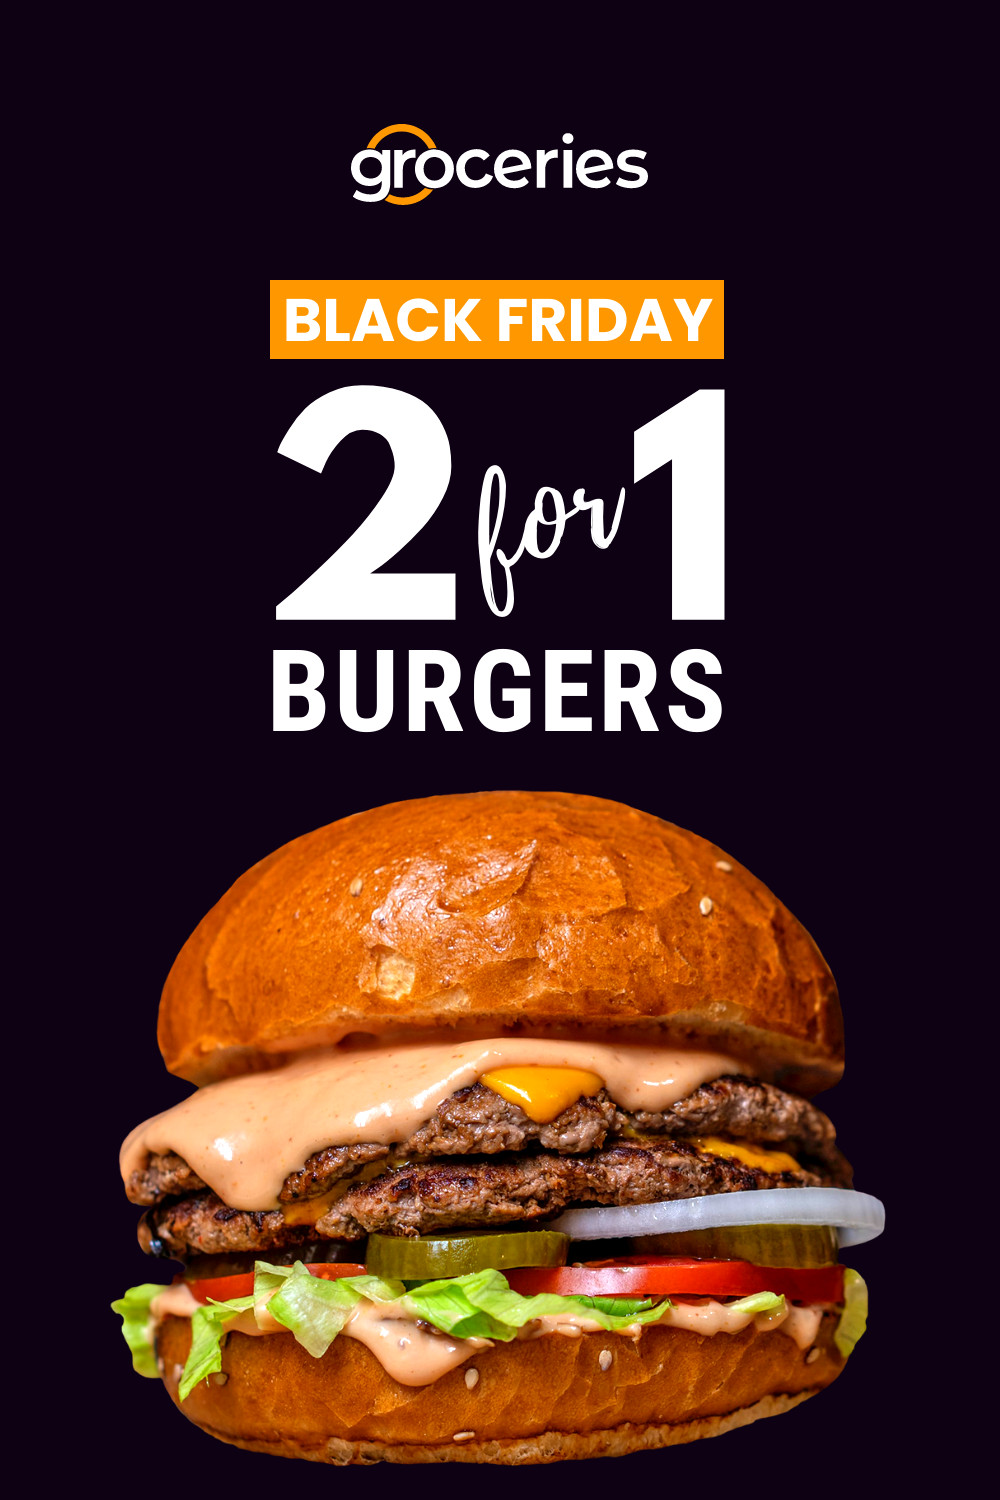 Black Friday 2 for 1 Burgers